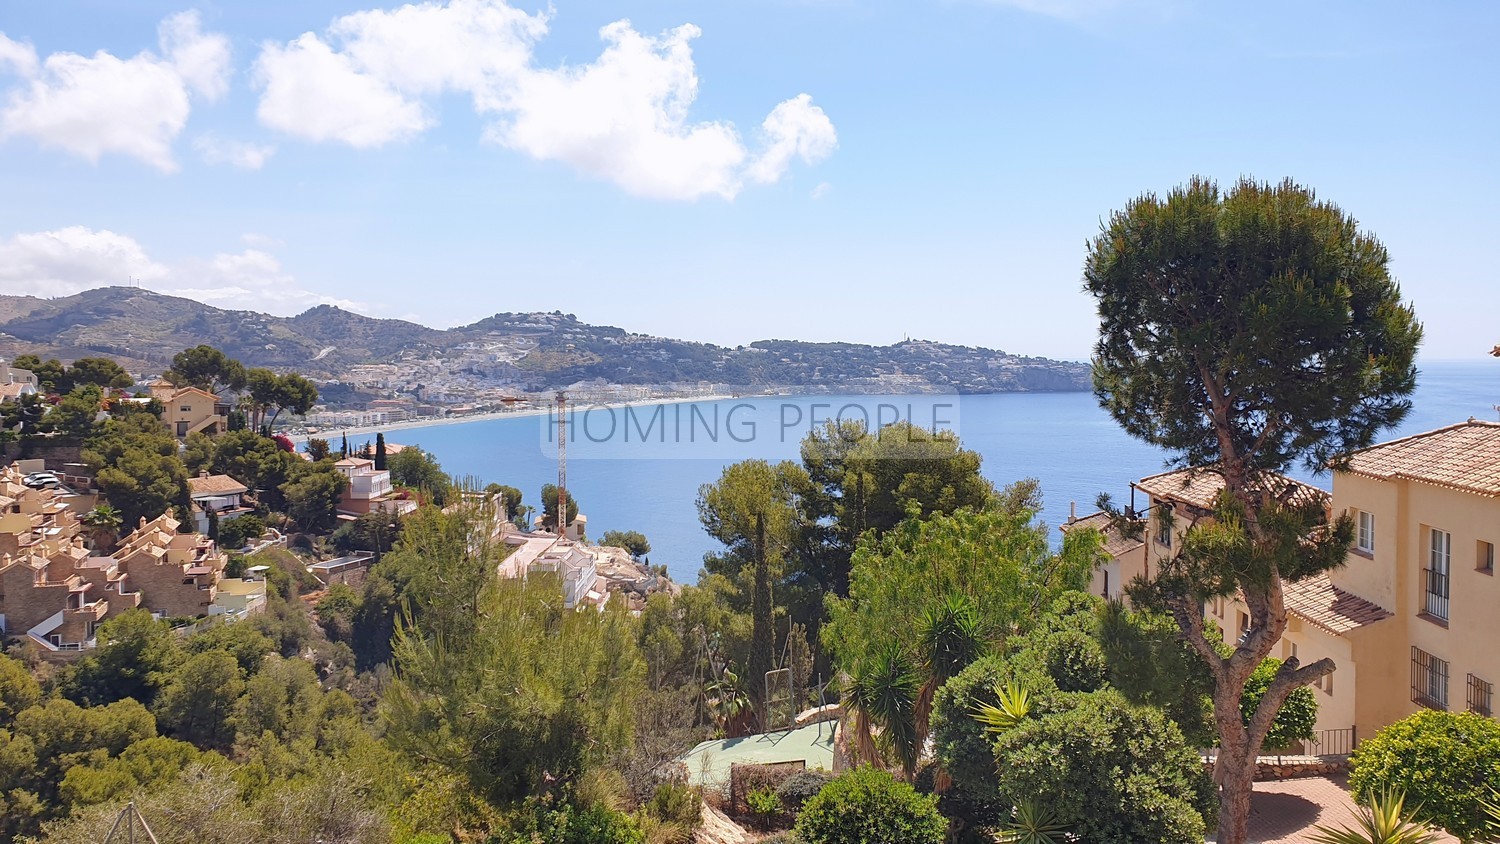 Bright family house, with terraces, private parking... and beautiful views over the bay !